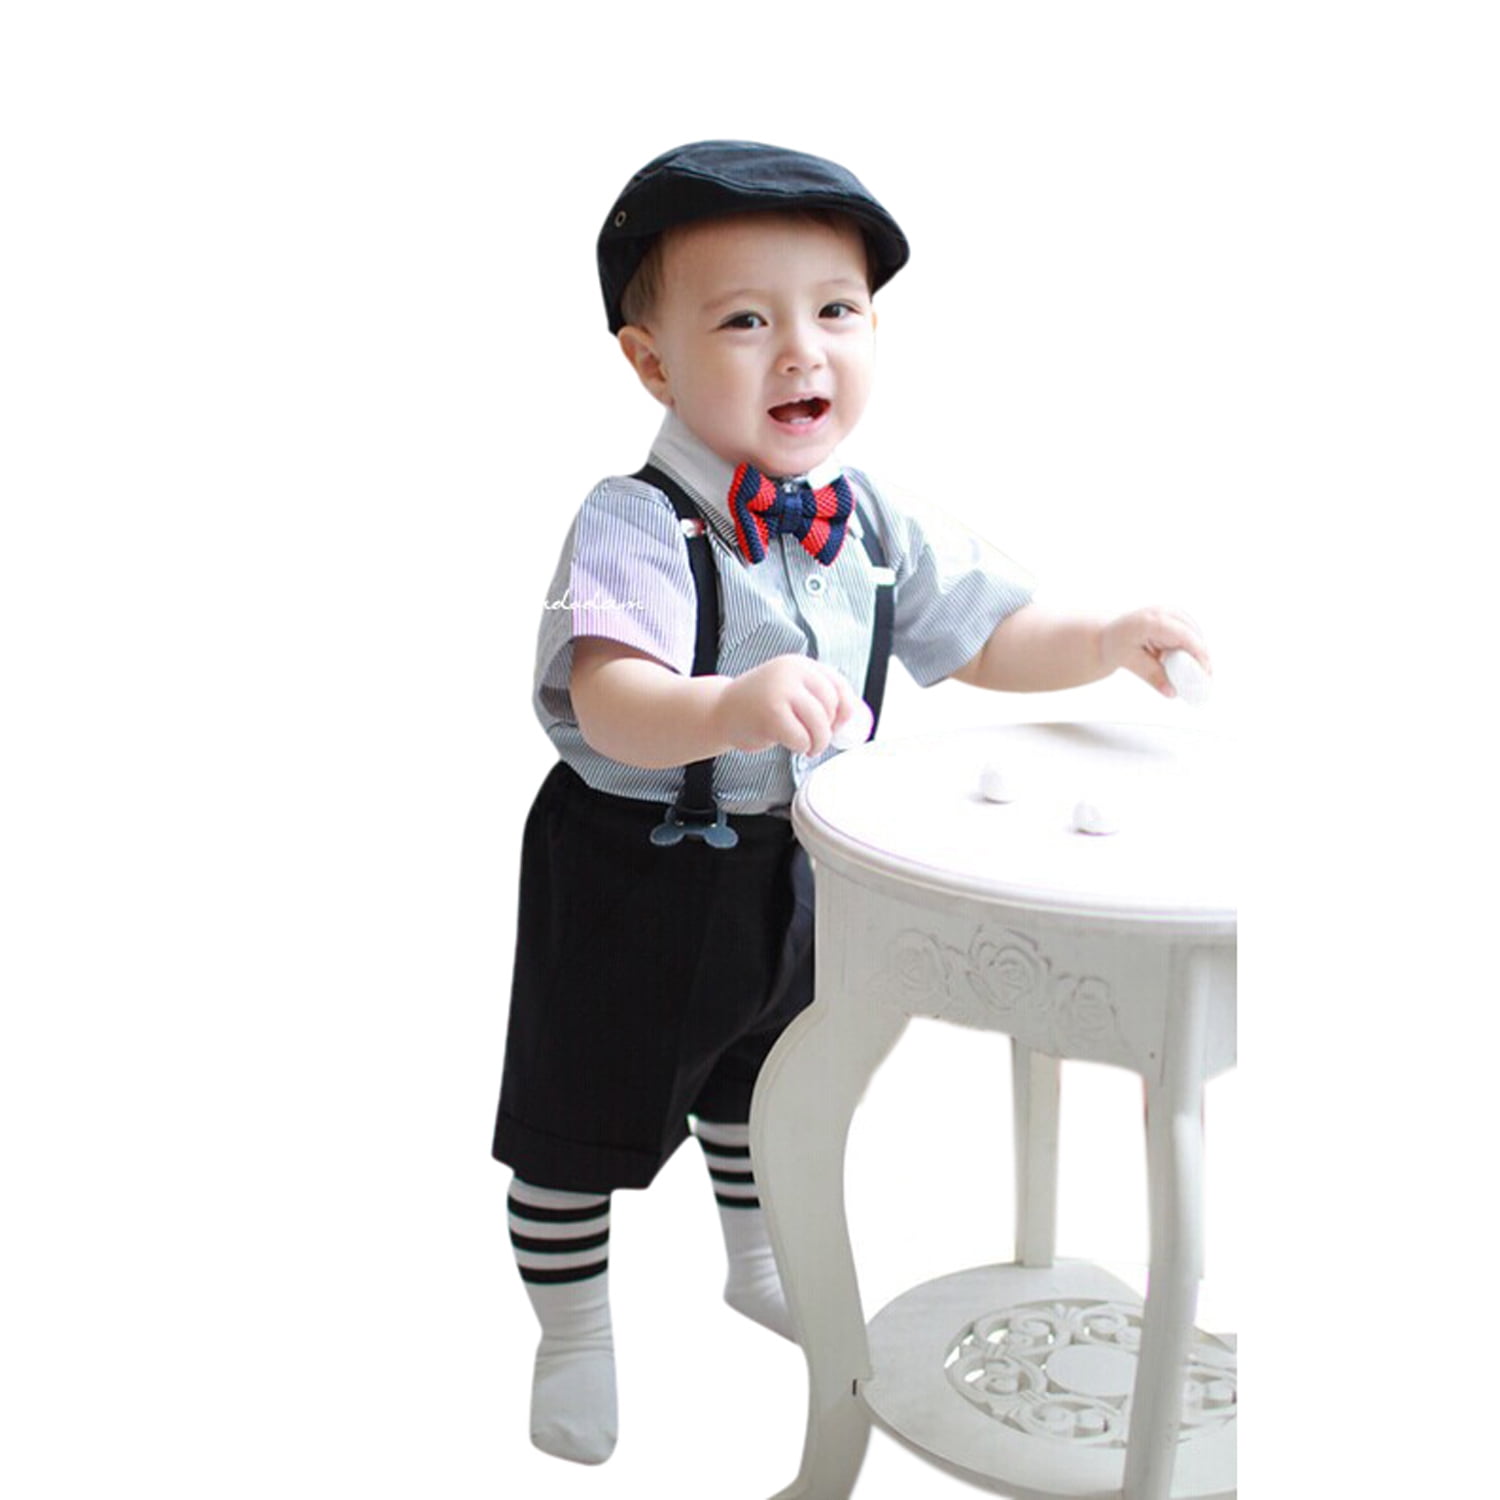 Xmiral Toddler Baby Boy Suits Outfit Short Sleeve Shirt+Suspender Shorts